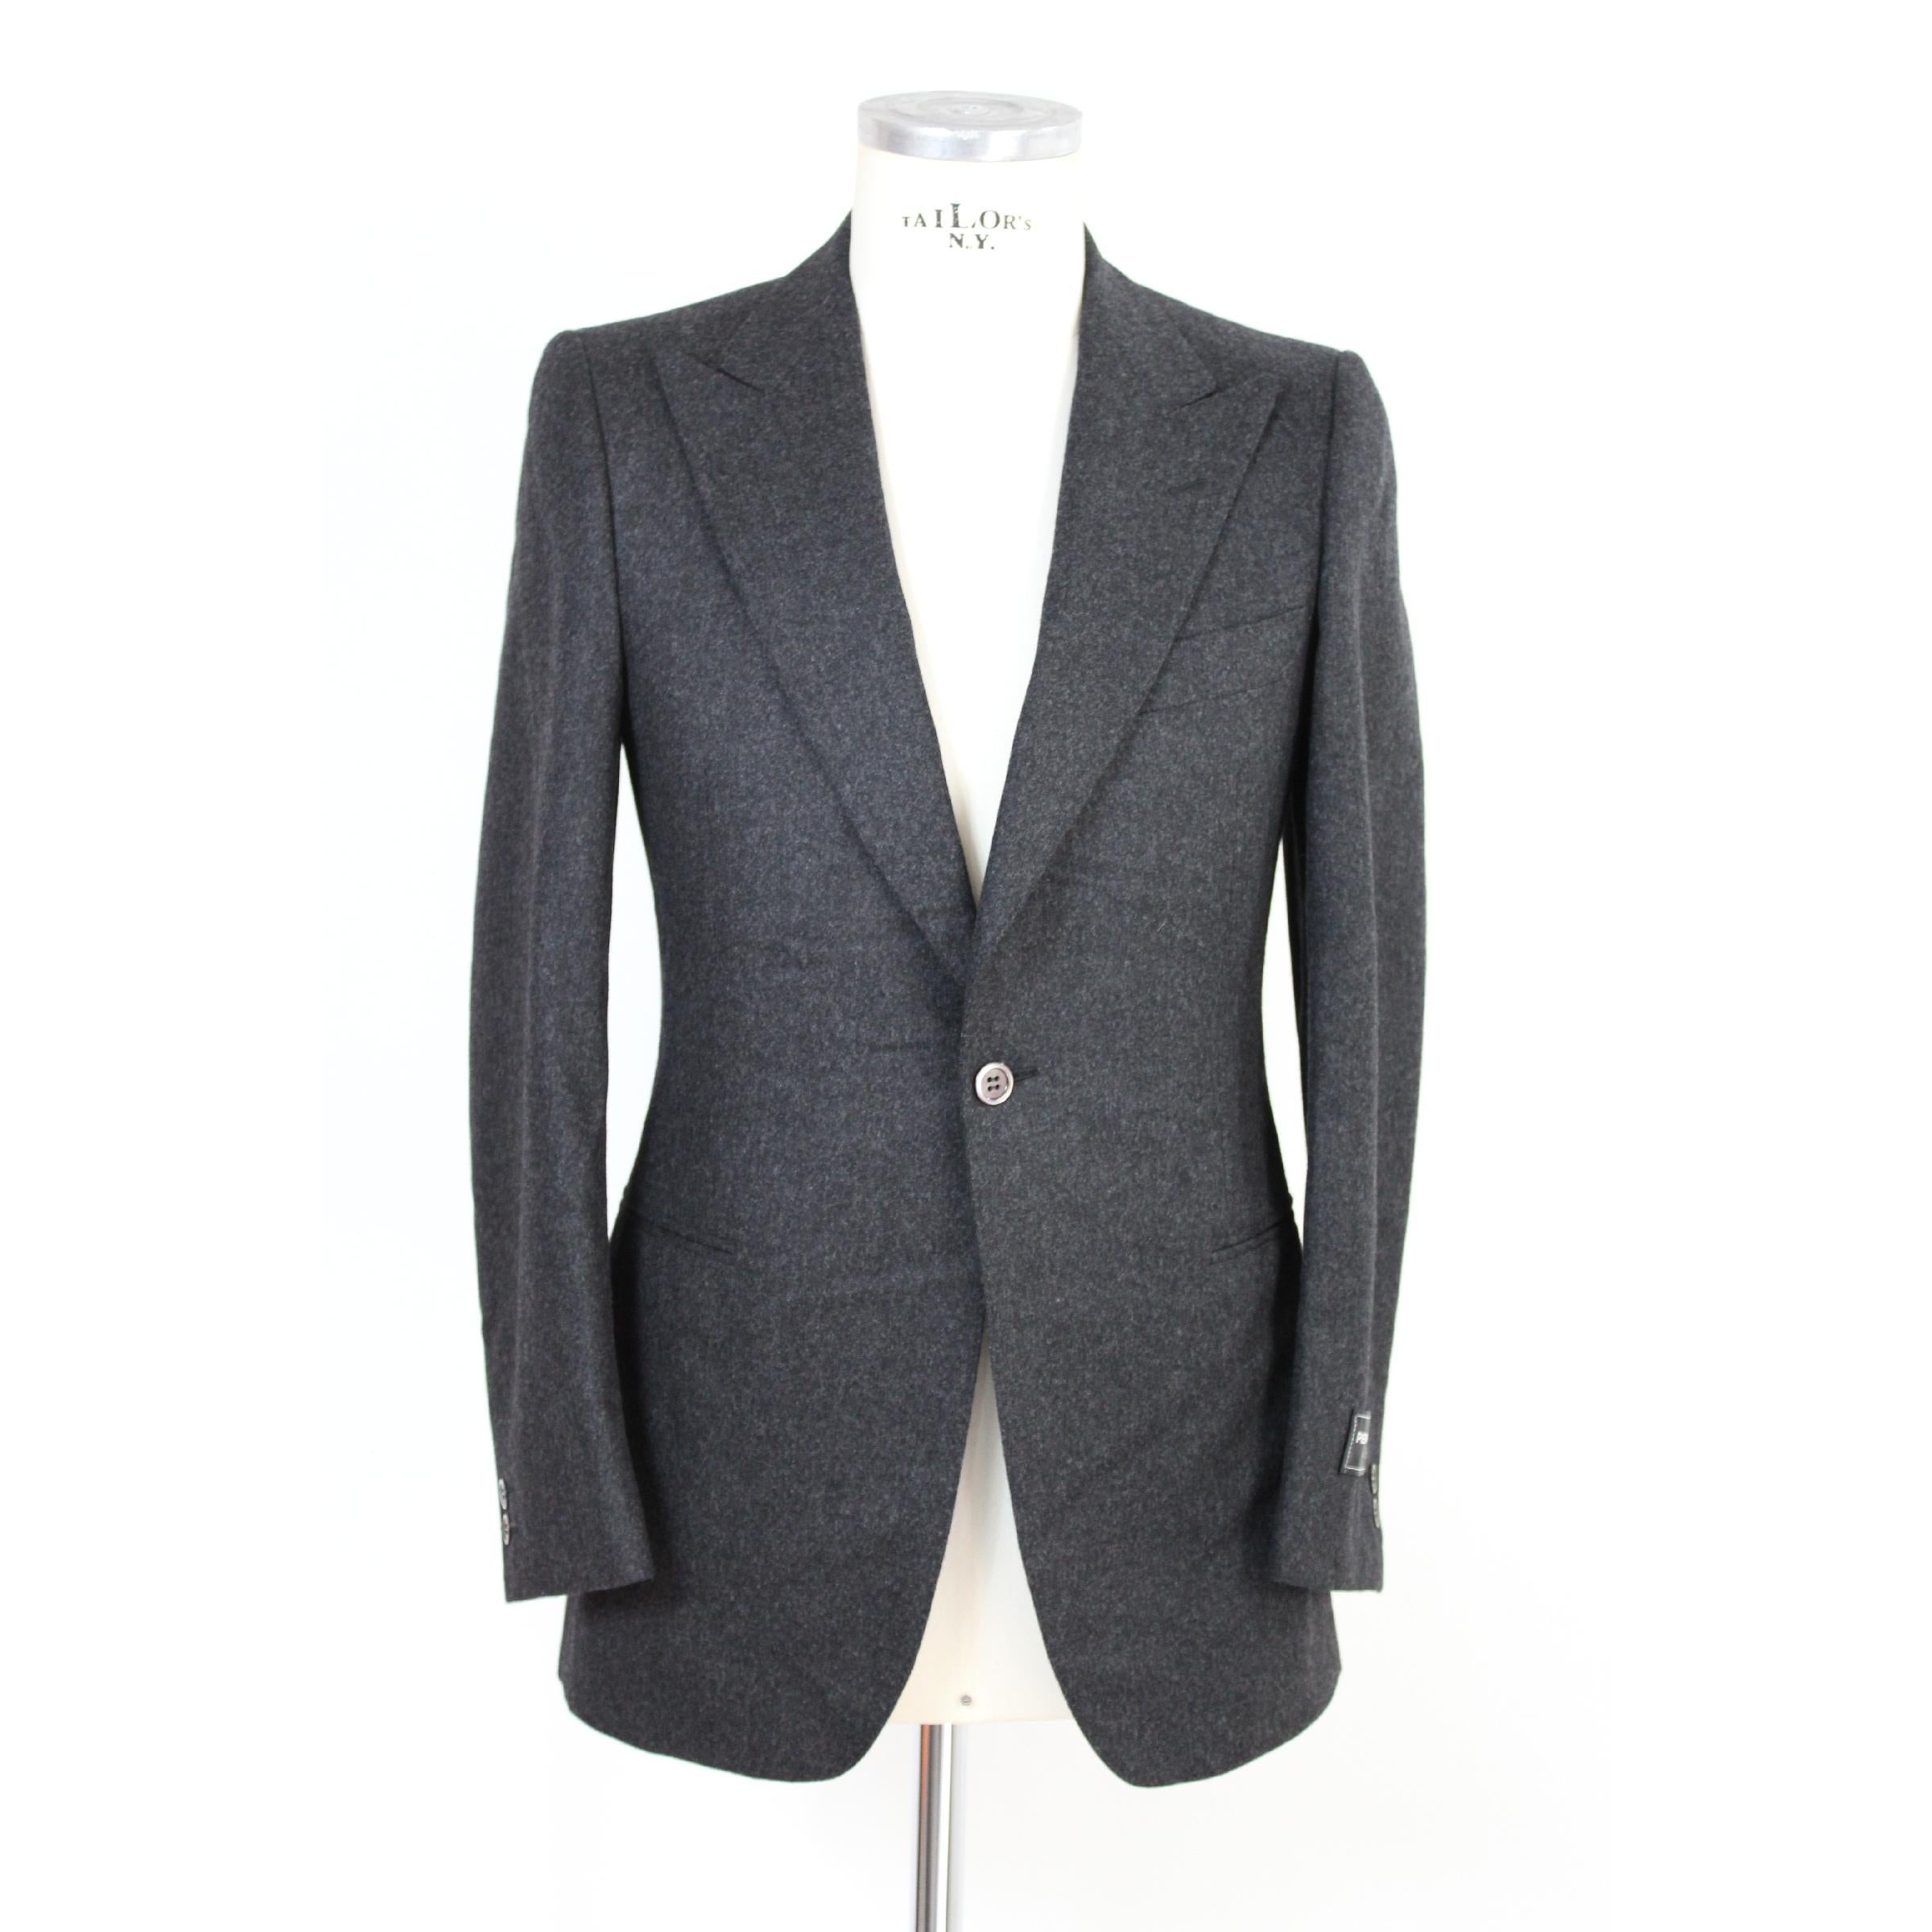 Pierre Cardin complete jacket and trousers. Gray and black color. Tuxedo
jacket with a button in dark gray. Gray and black fantasy trousers, two side pockets and button closure. Made in Italy. New without label.

Size 50 It 40 Us 40 Uk
Shoulder: 50